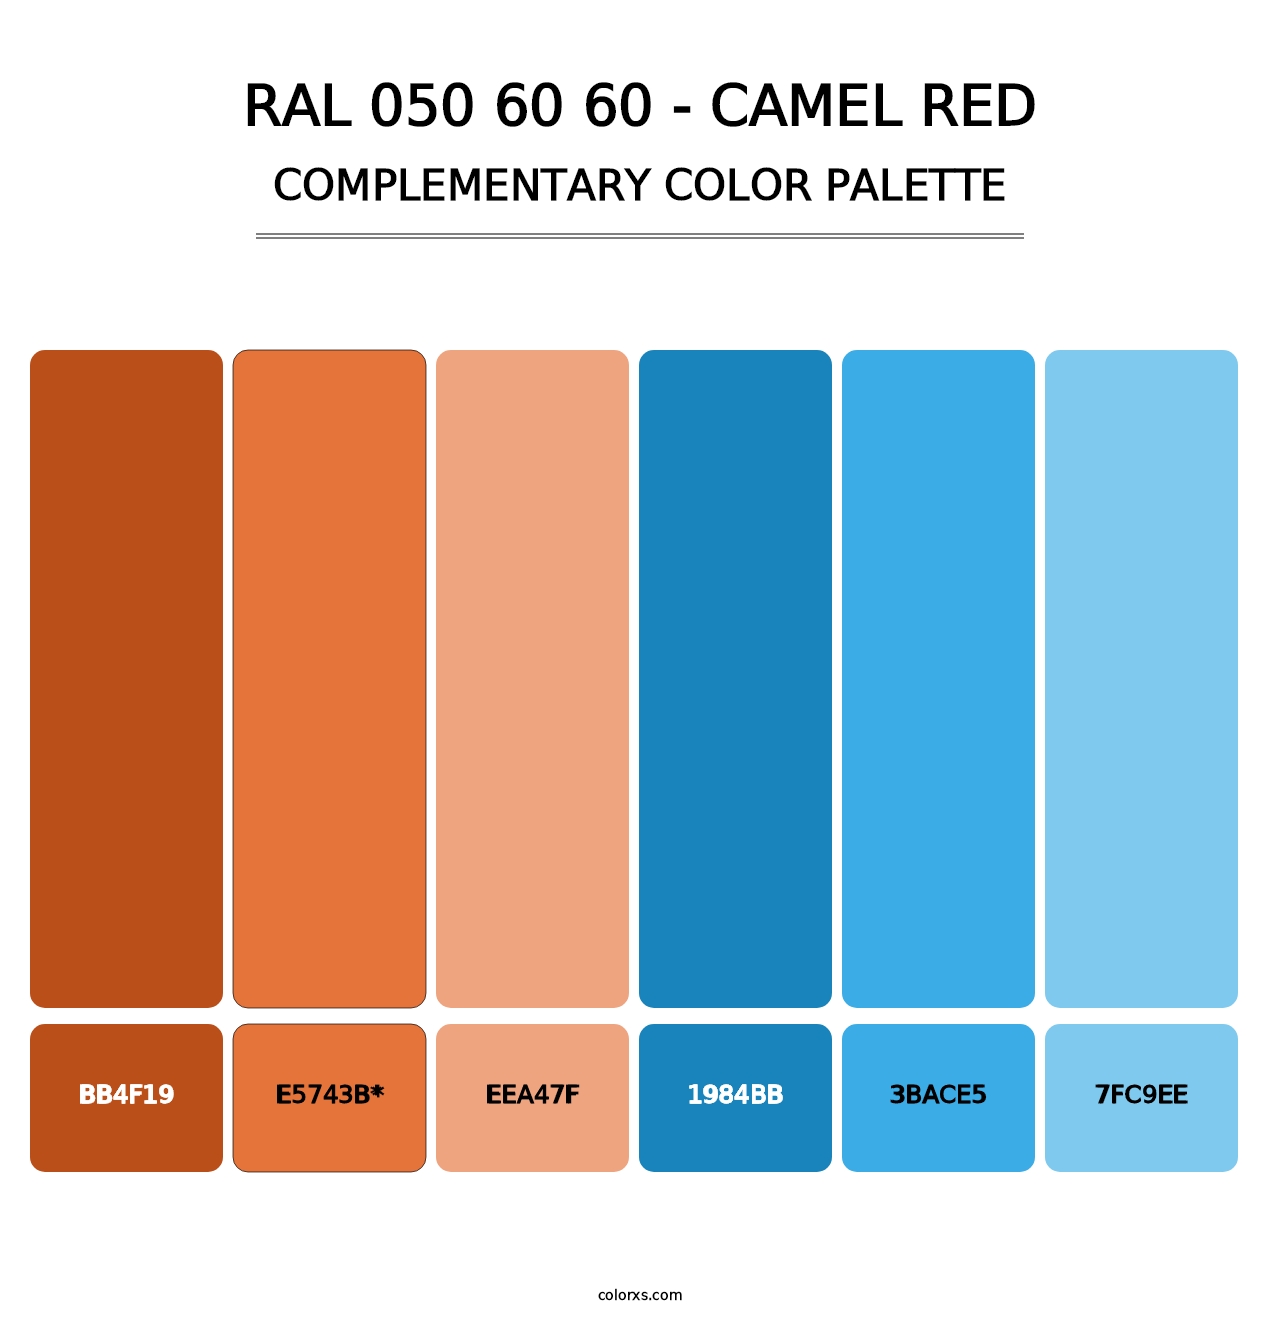 RAL 050 60 60 - Camel Red - Complementary Color Palette